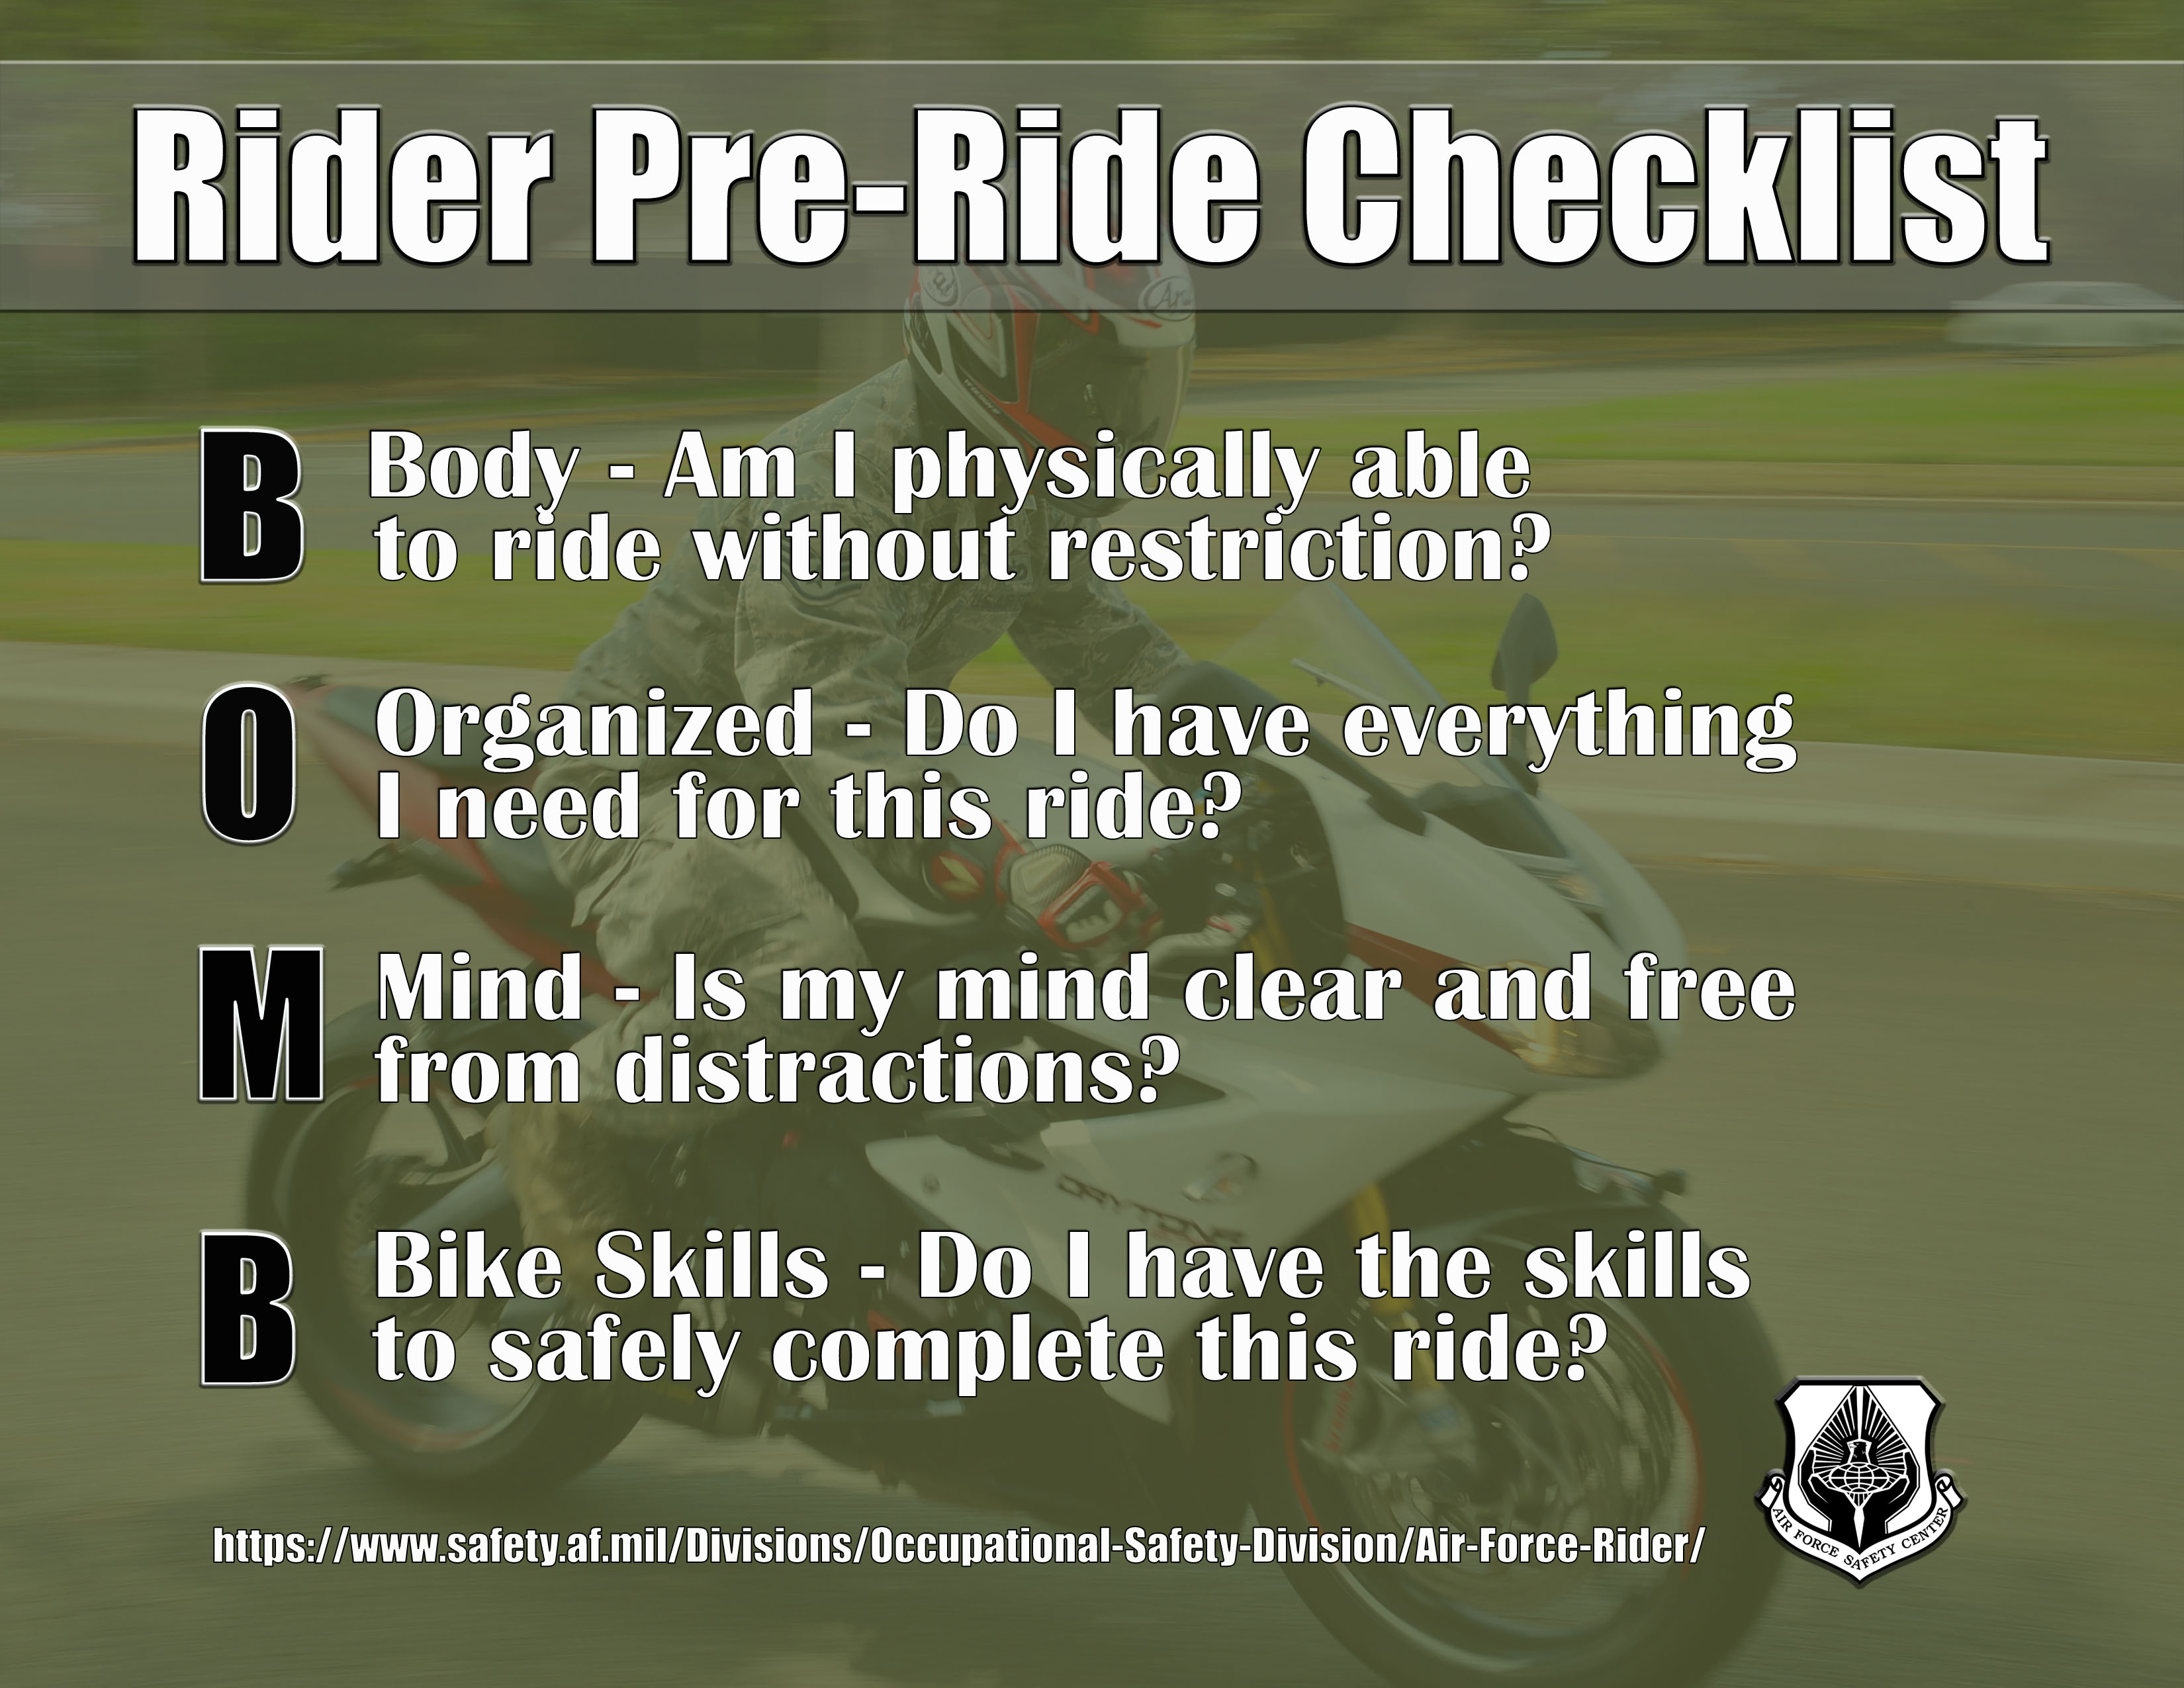 BOMBS Pre-Ride checklist - Sportsbike Motorcycle Rider with riding gear on